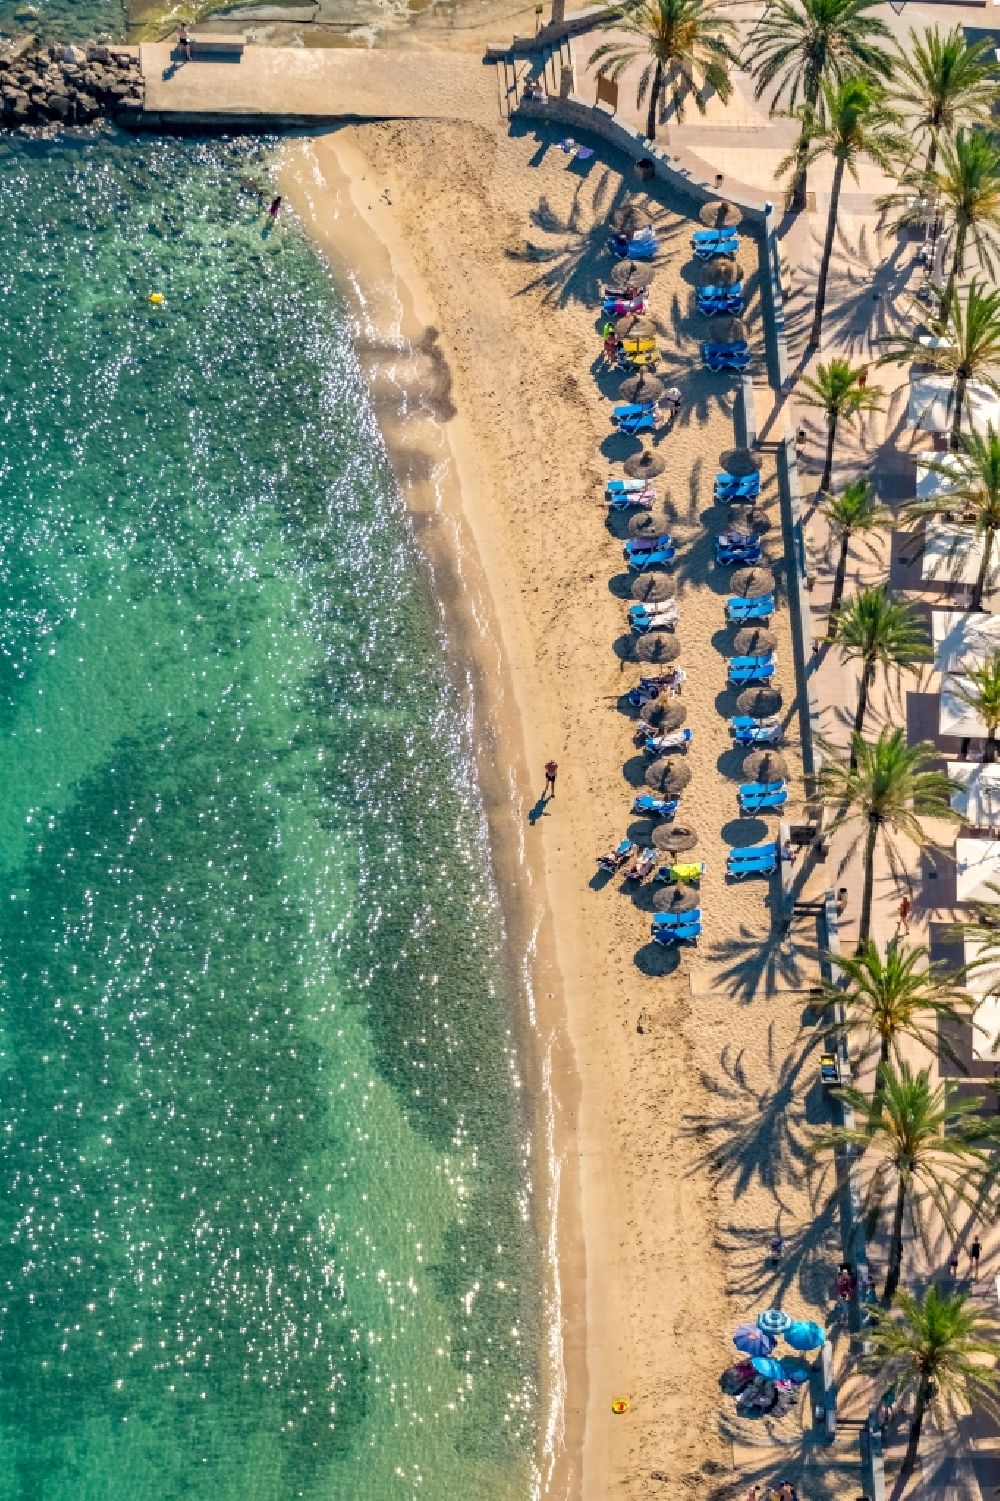 Soller from the bird's eye view: Parasol - rows on the sandy beach in the coastal area along the Carrer de la Marina in Soller in Balearic island of Mallorca, Spain